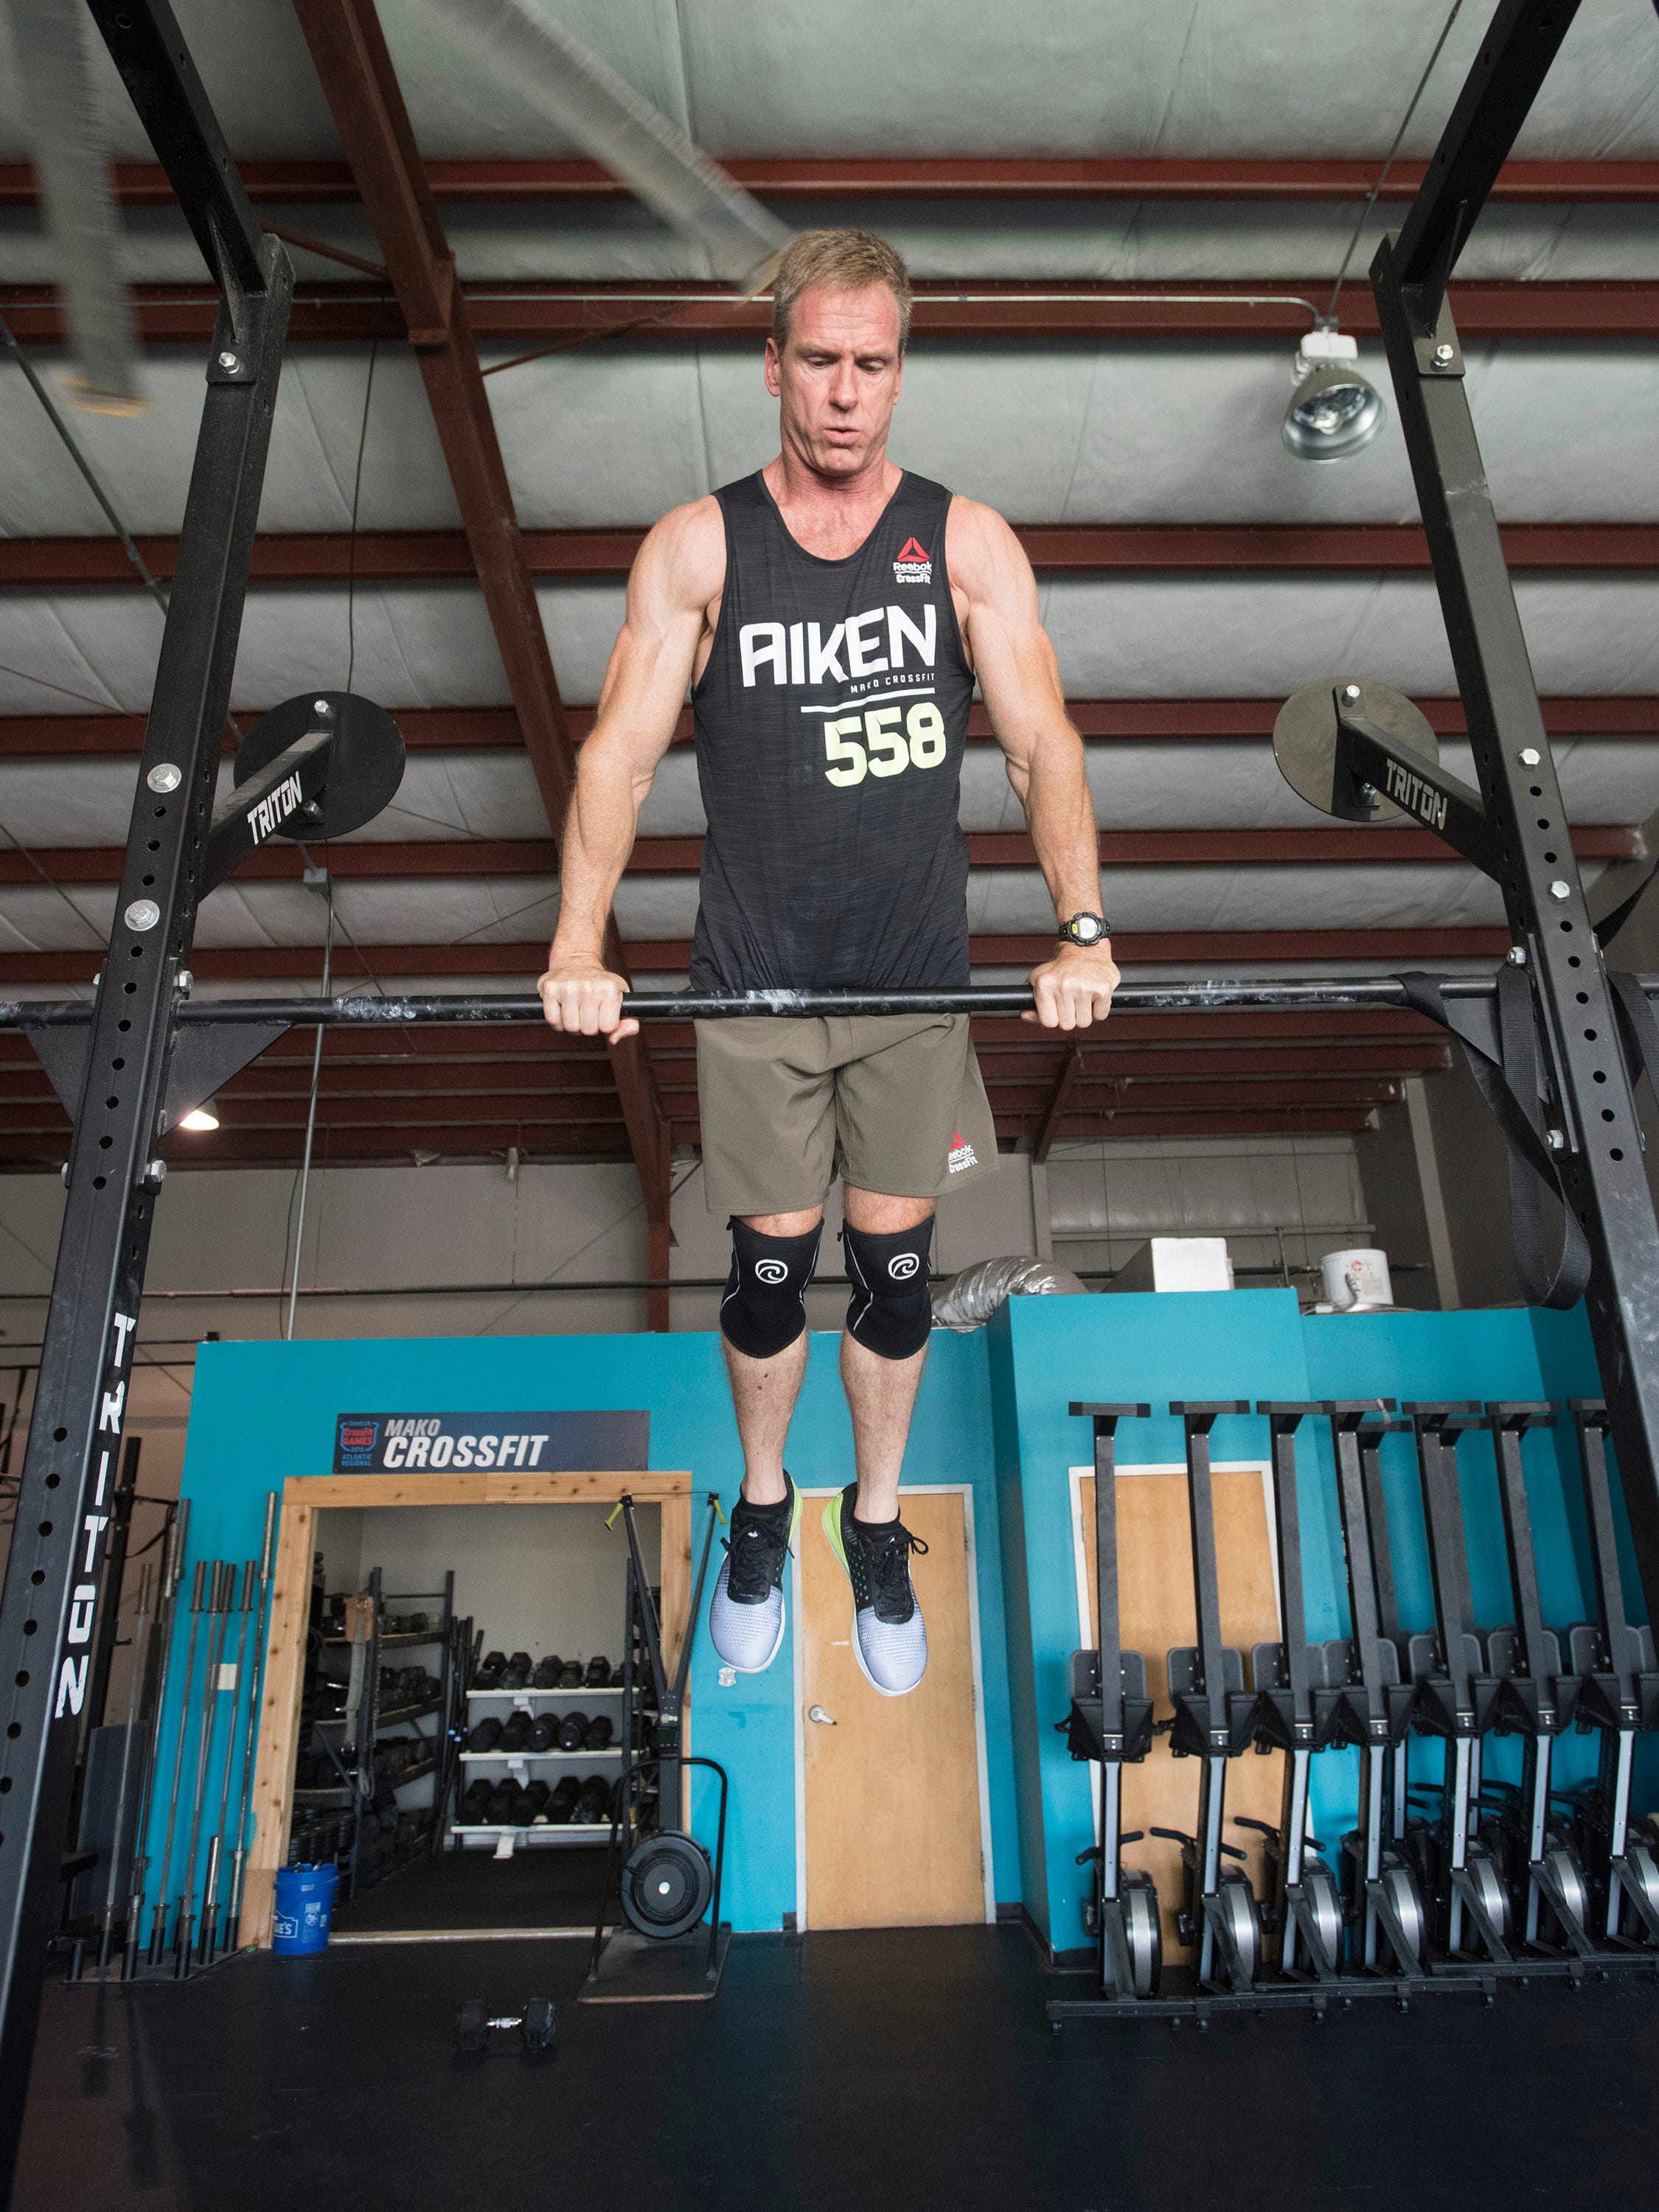 CrossFit is the world's fittest